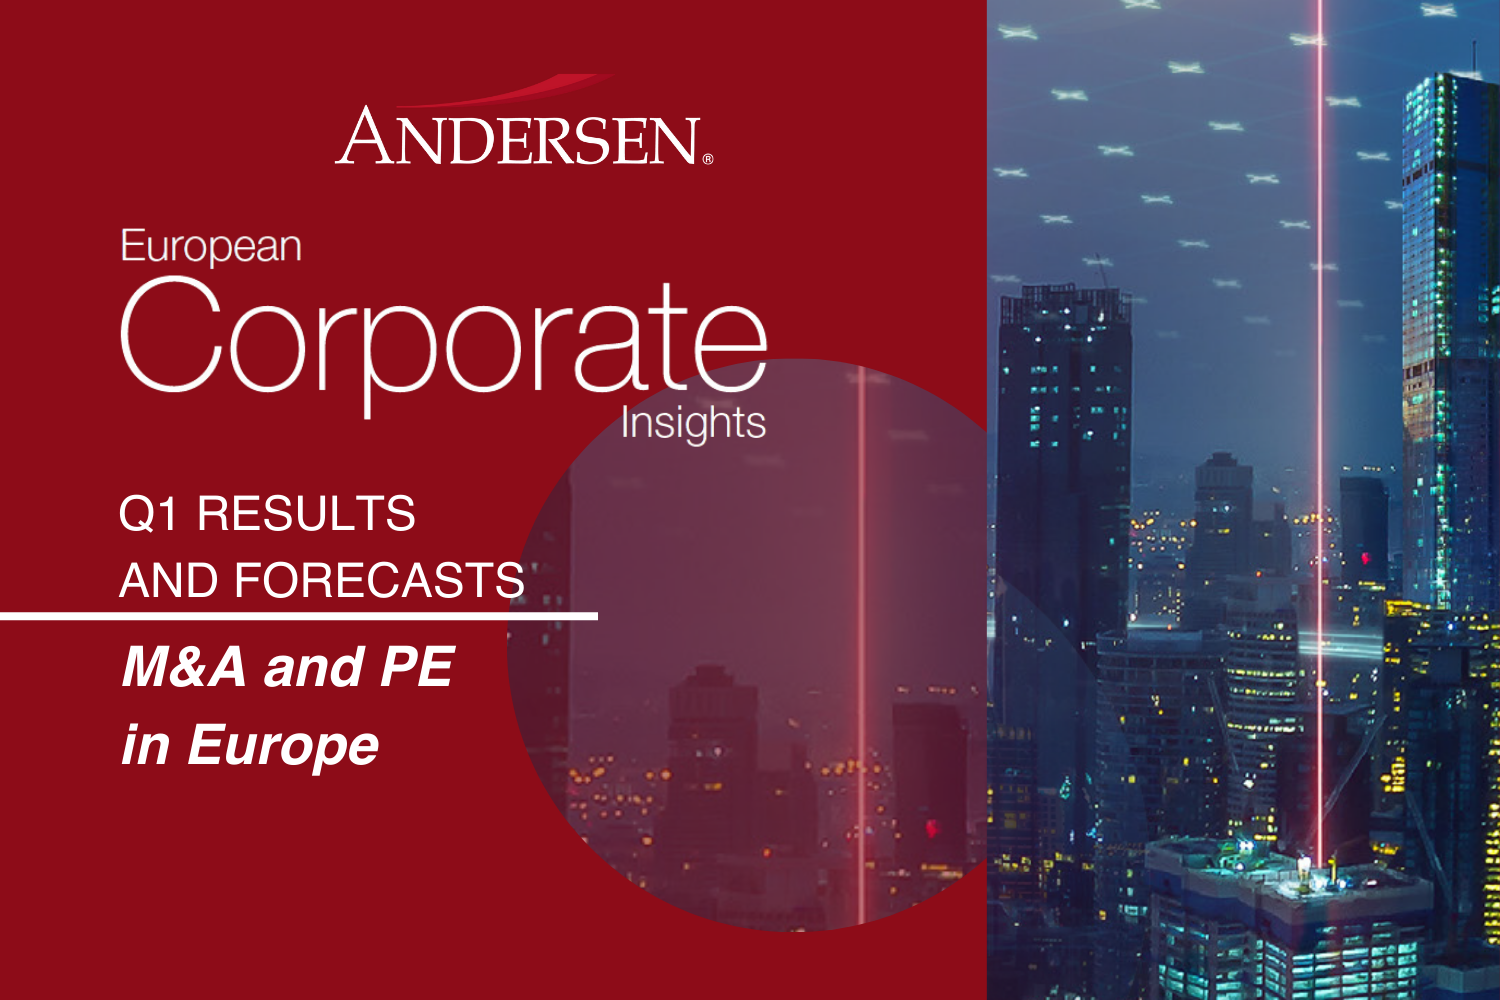 European Corporate Insights Magazine: M&A and PE in Europe